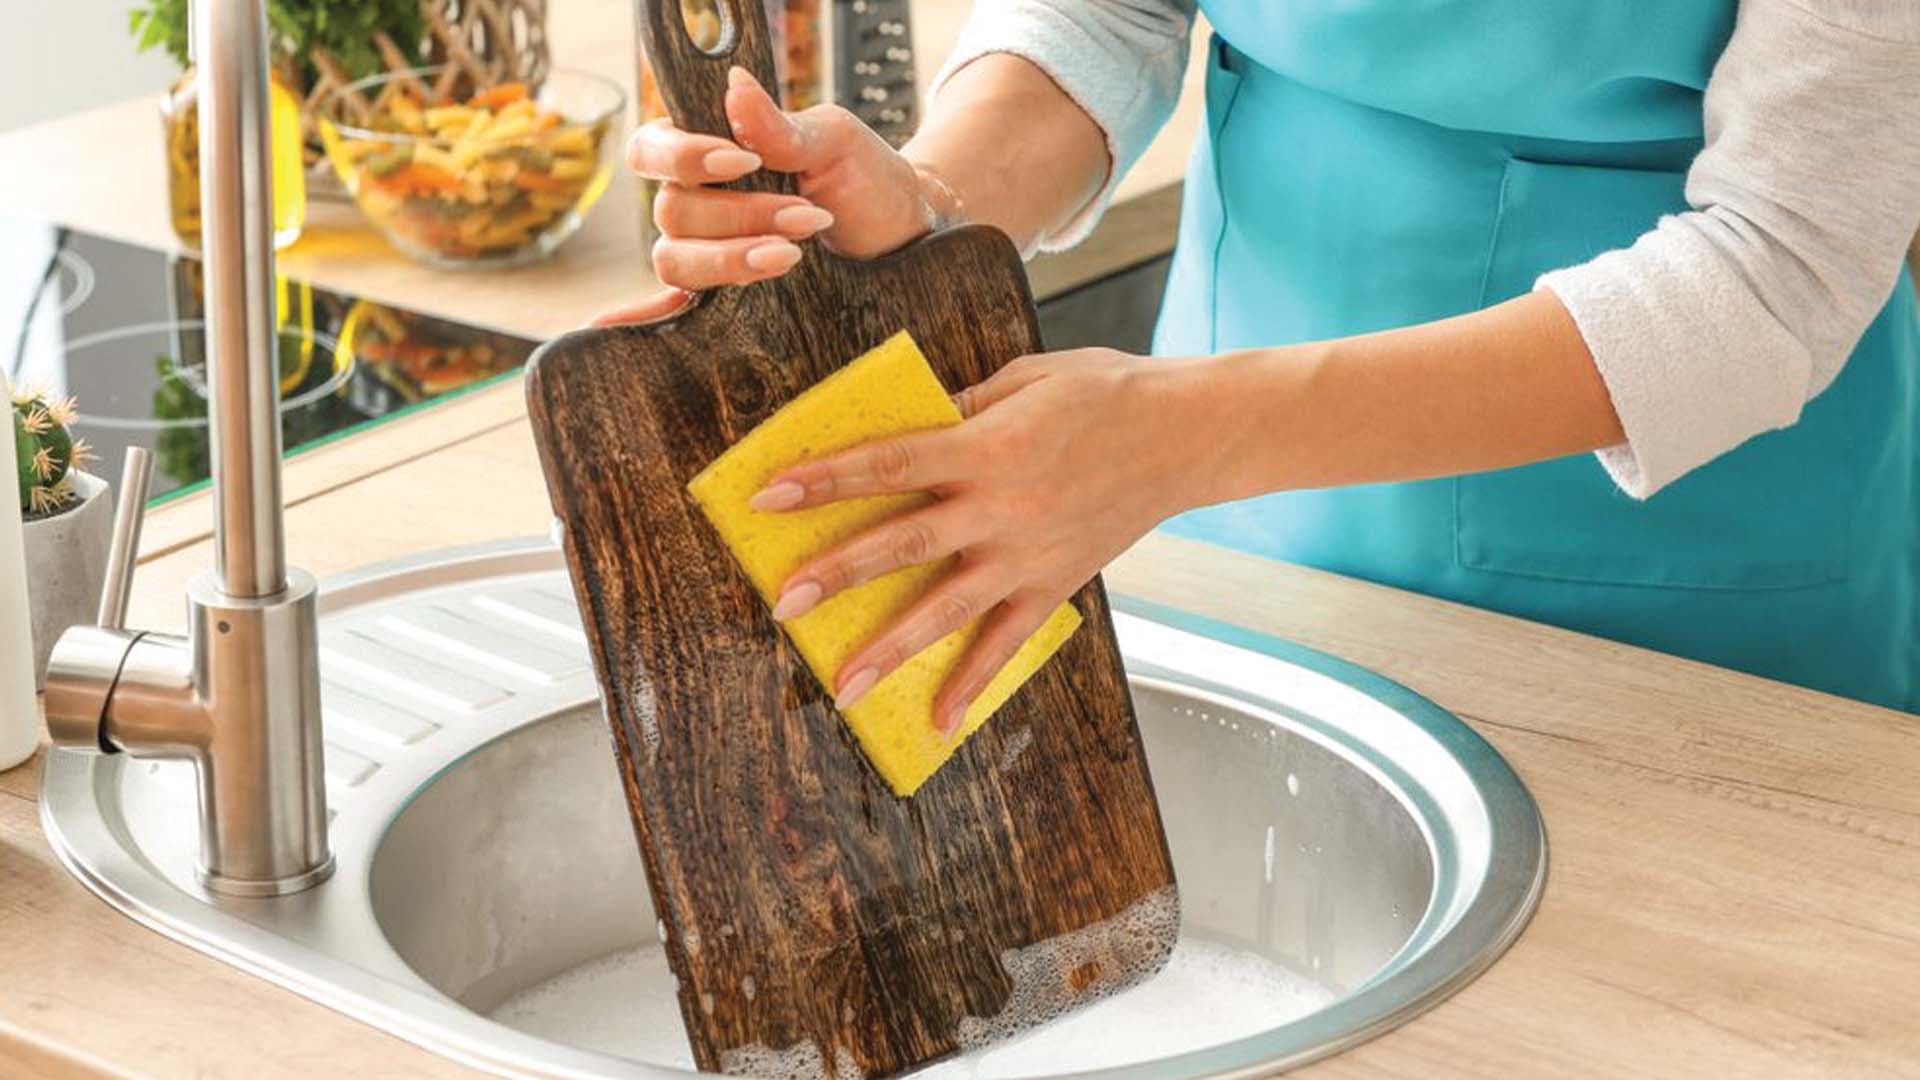 Woman making cutting board more hygienic by cleaning it